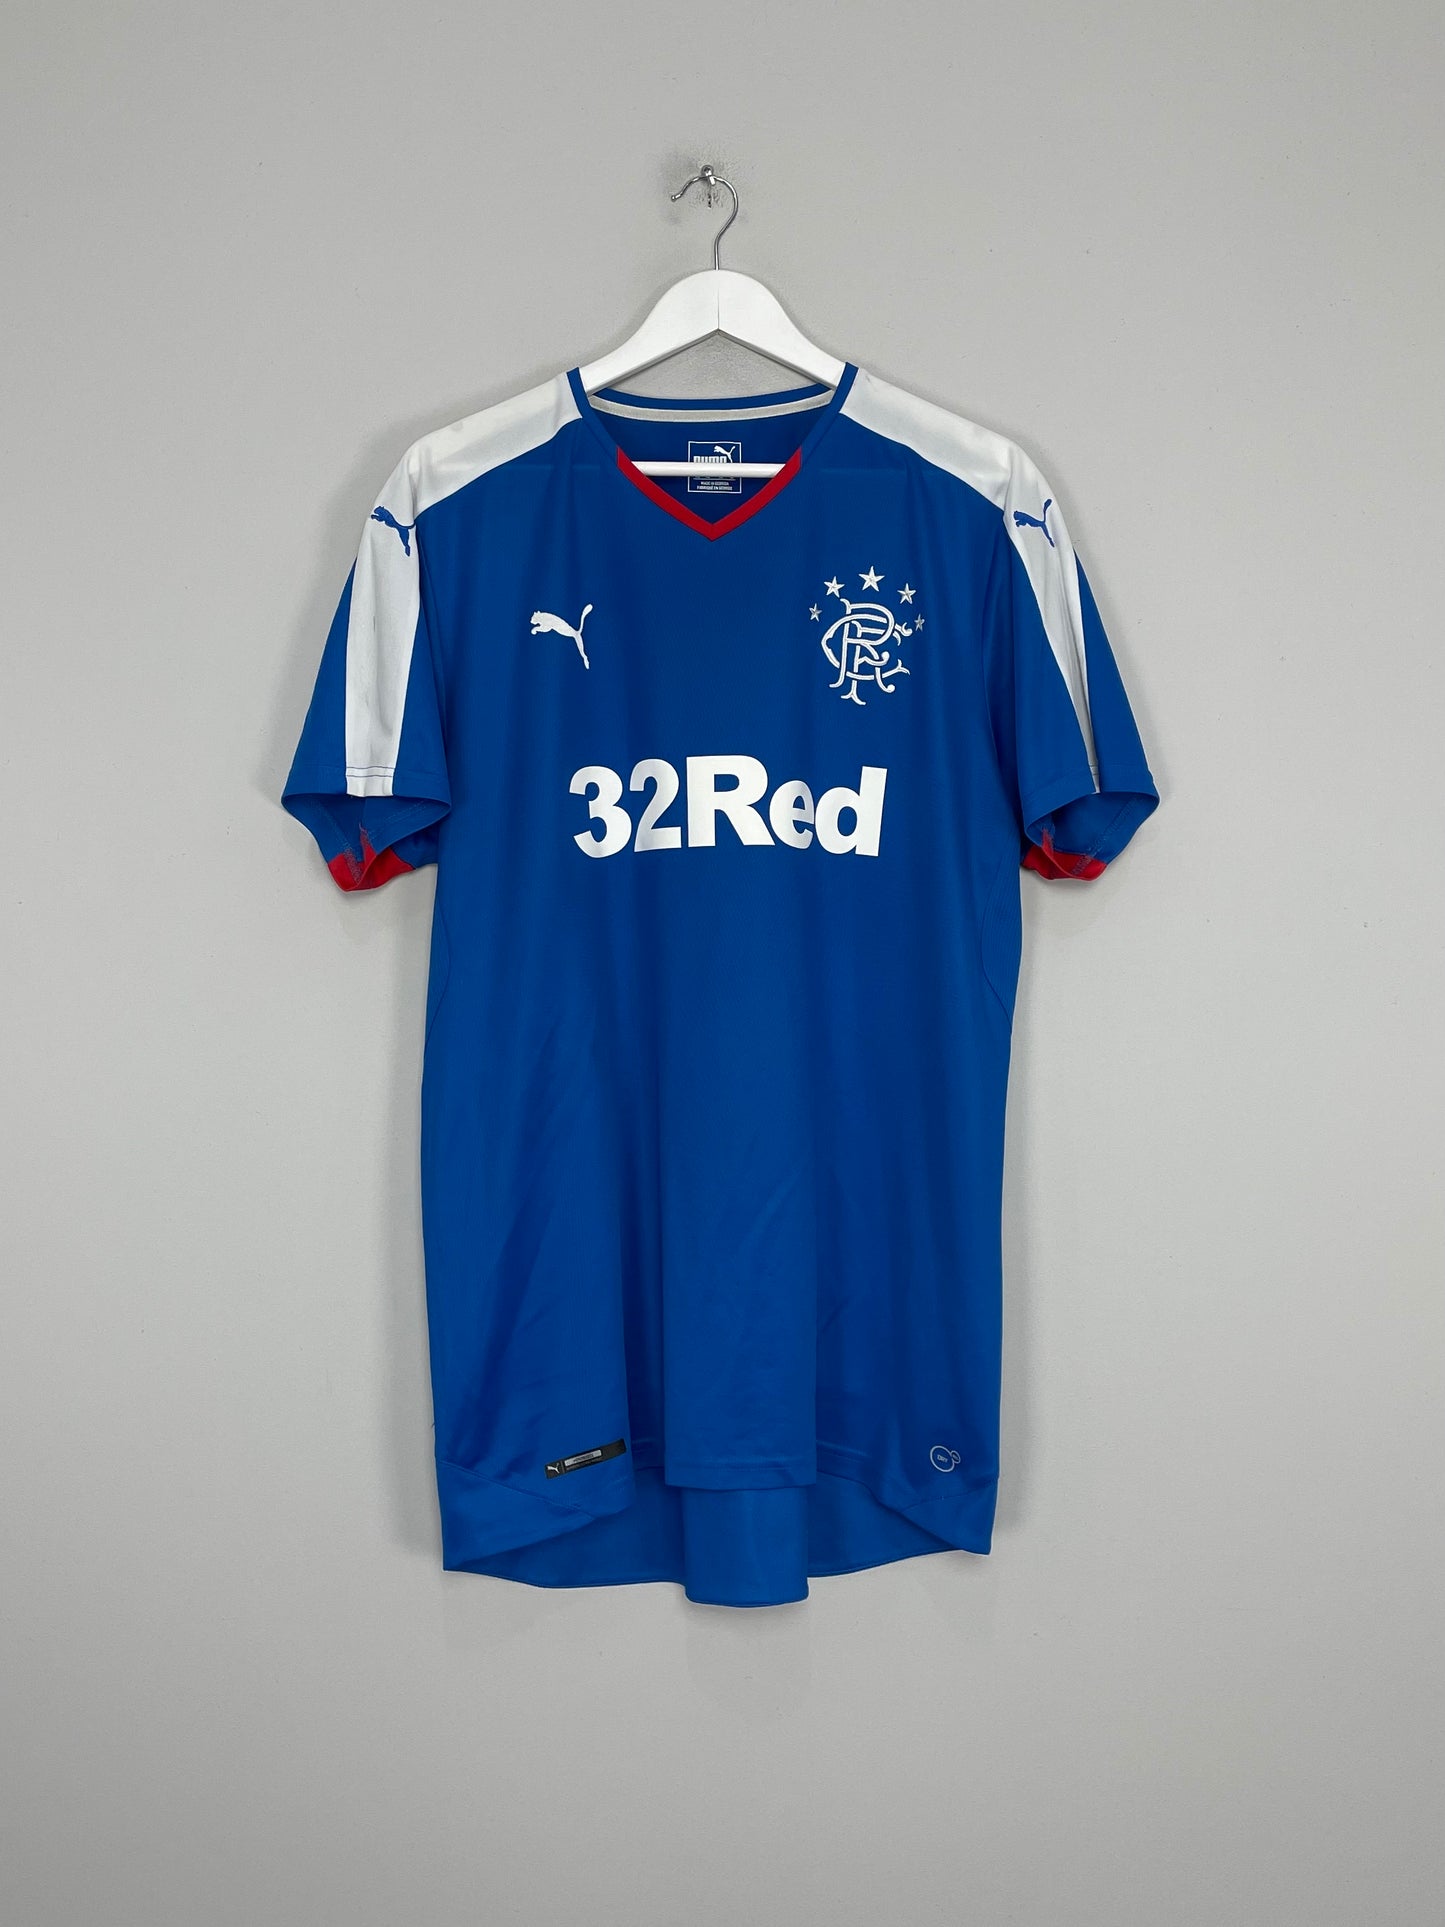 Image of the Rangers shirt from the 2015/16 season